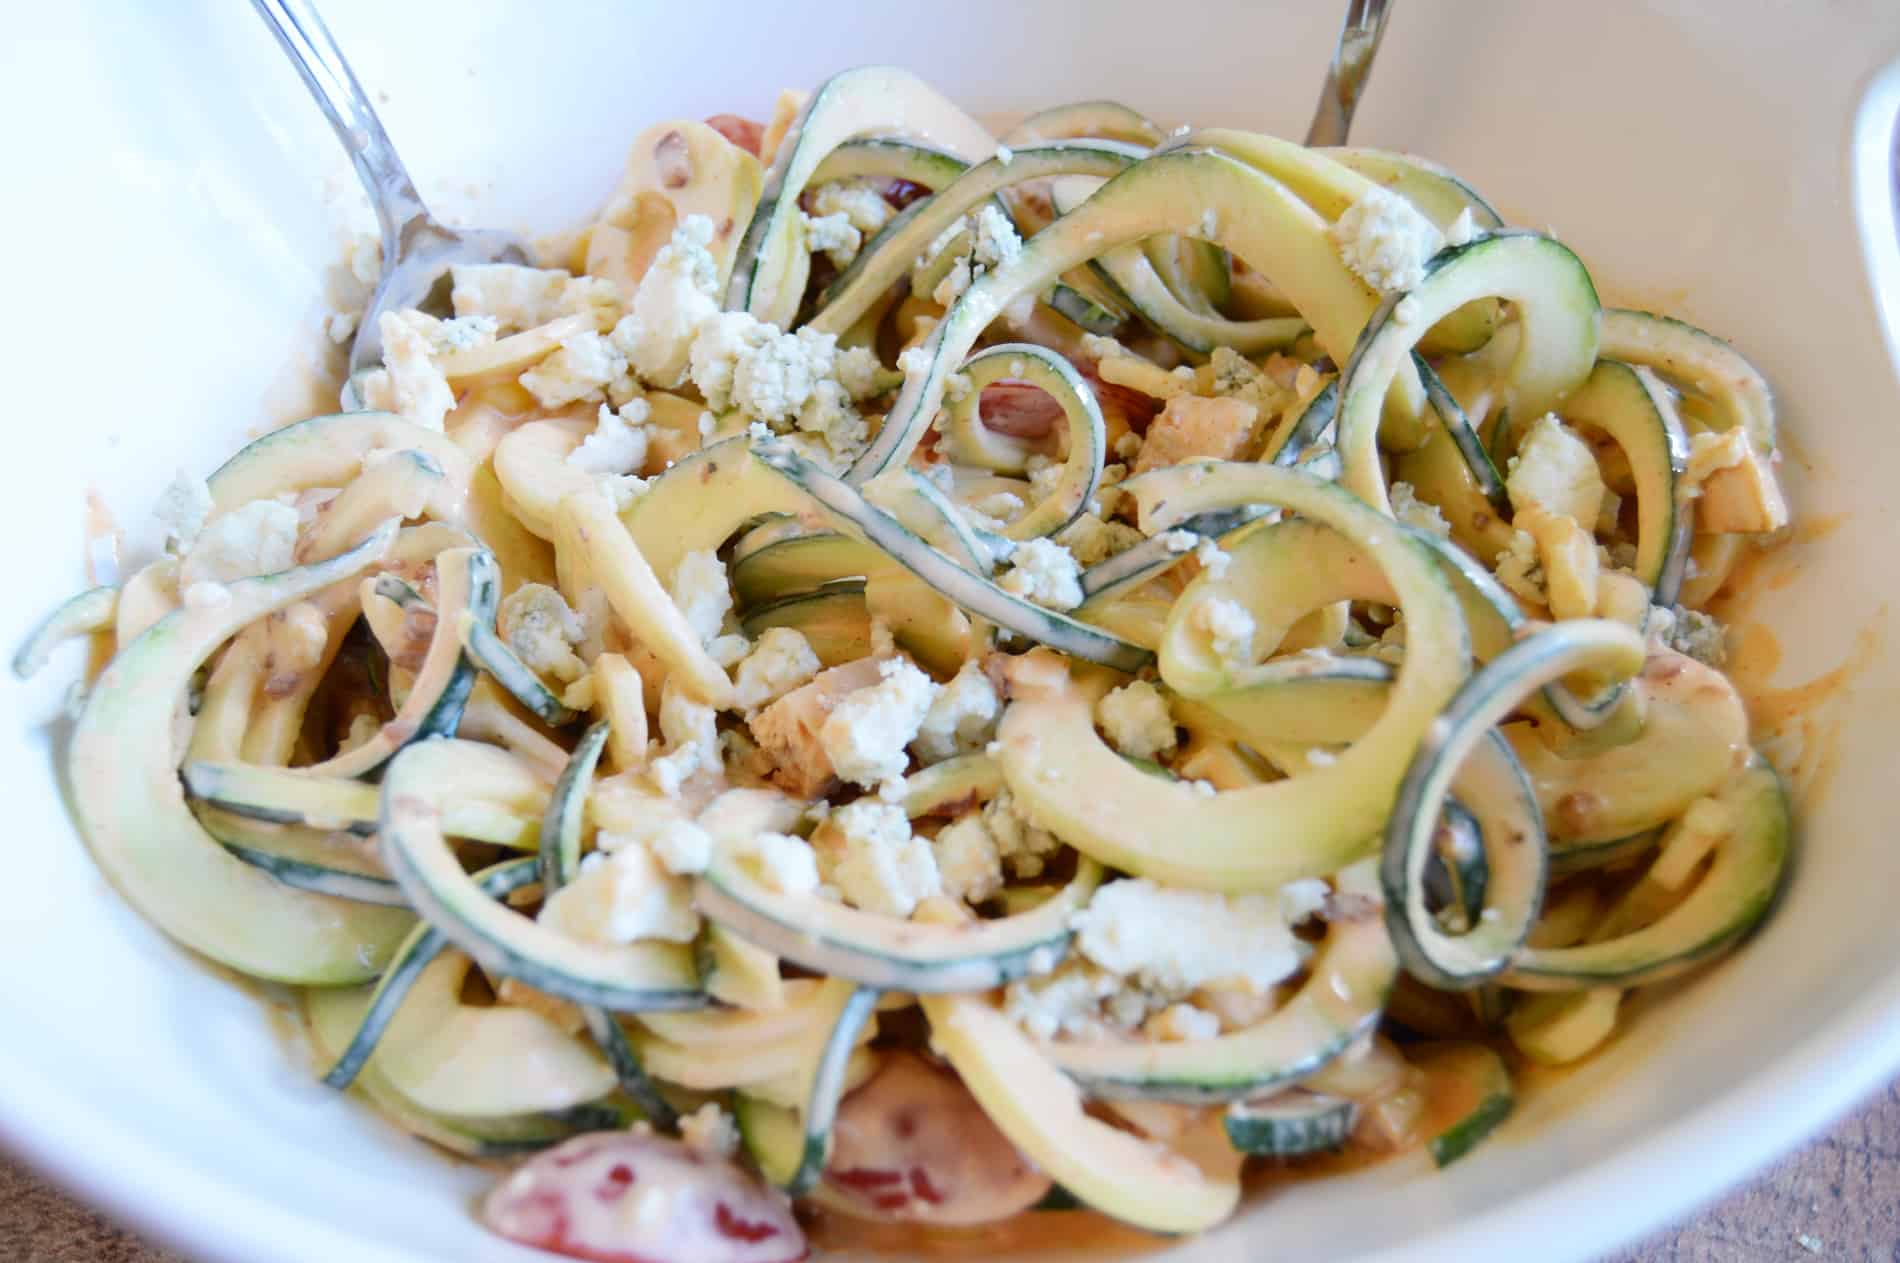 Spiralized zucchini salad made with chicken, Jimmy's Blue Cheese, tomatoes, bacon and corn in white bowl